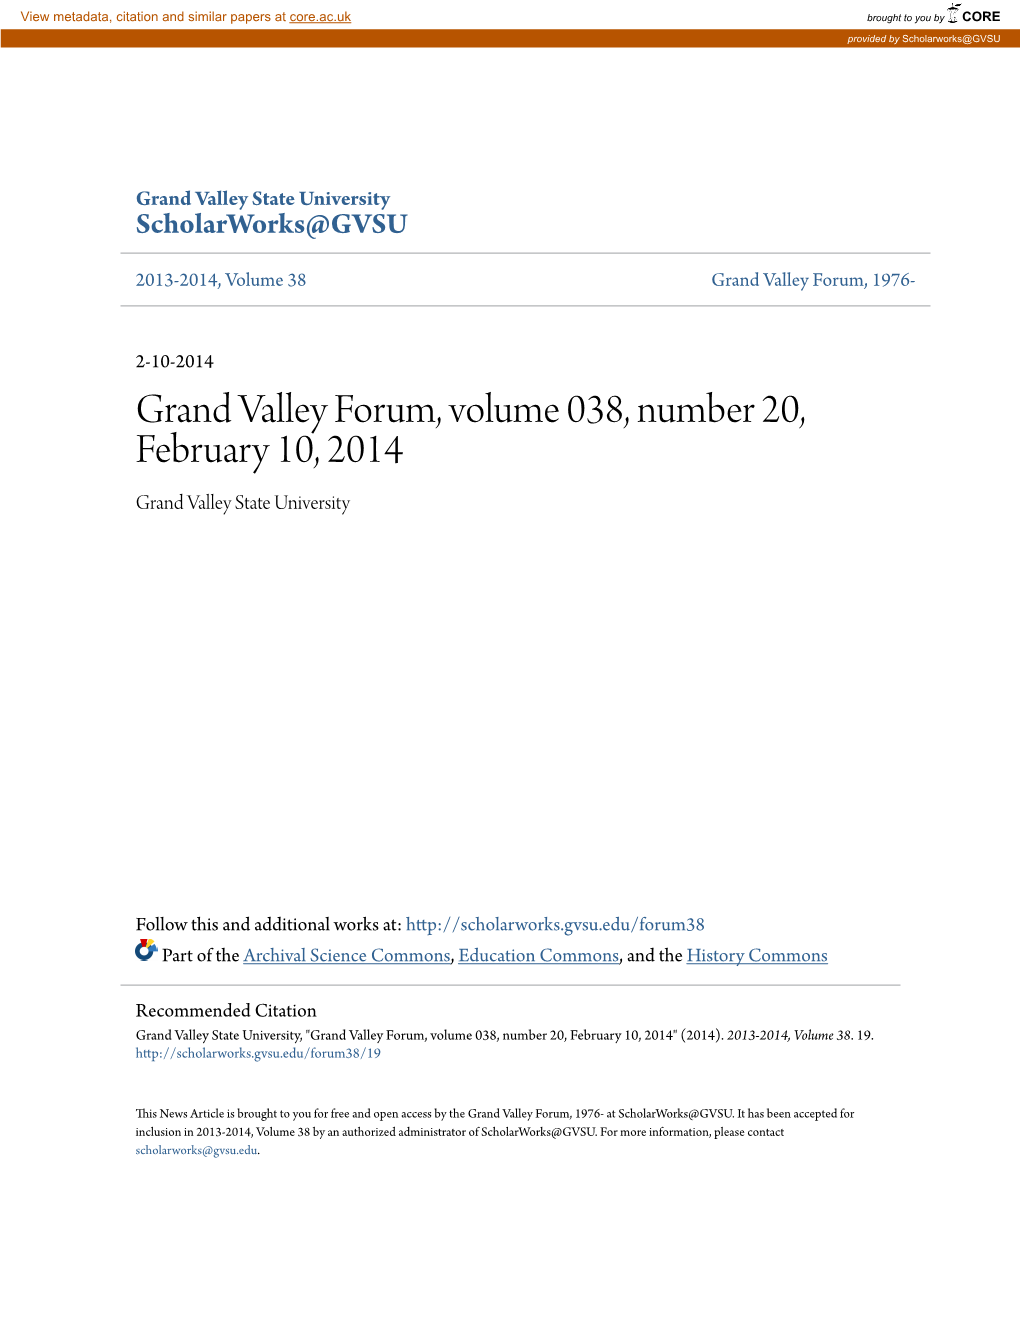 Grand Valley Forum, Volume 038, Number 20, February 10, 2014 Grand Valley State University